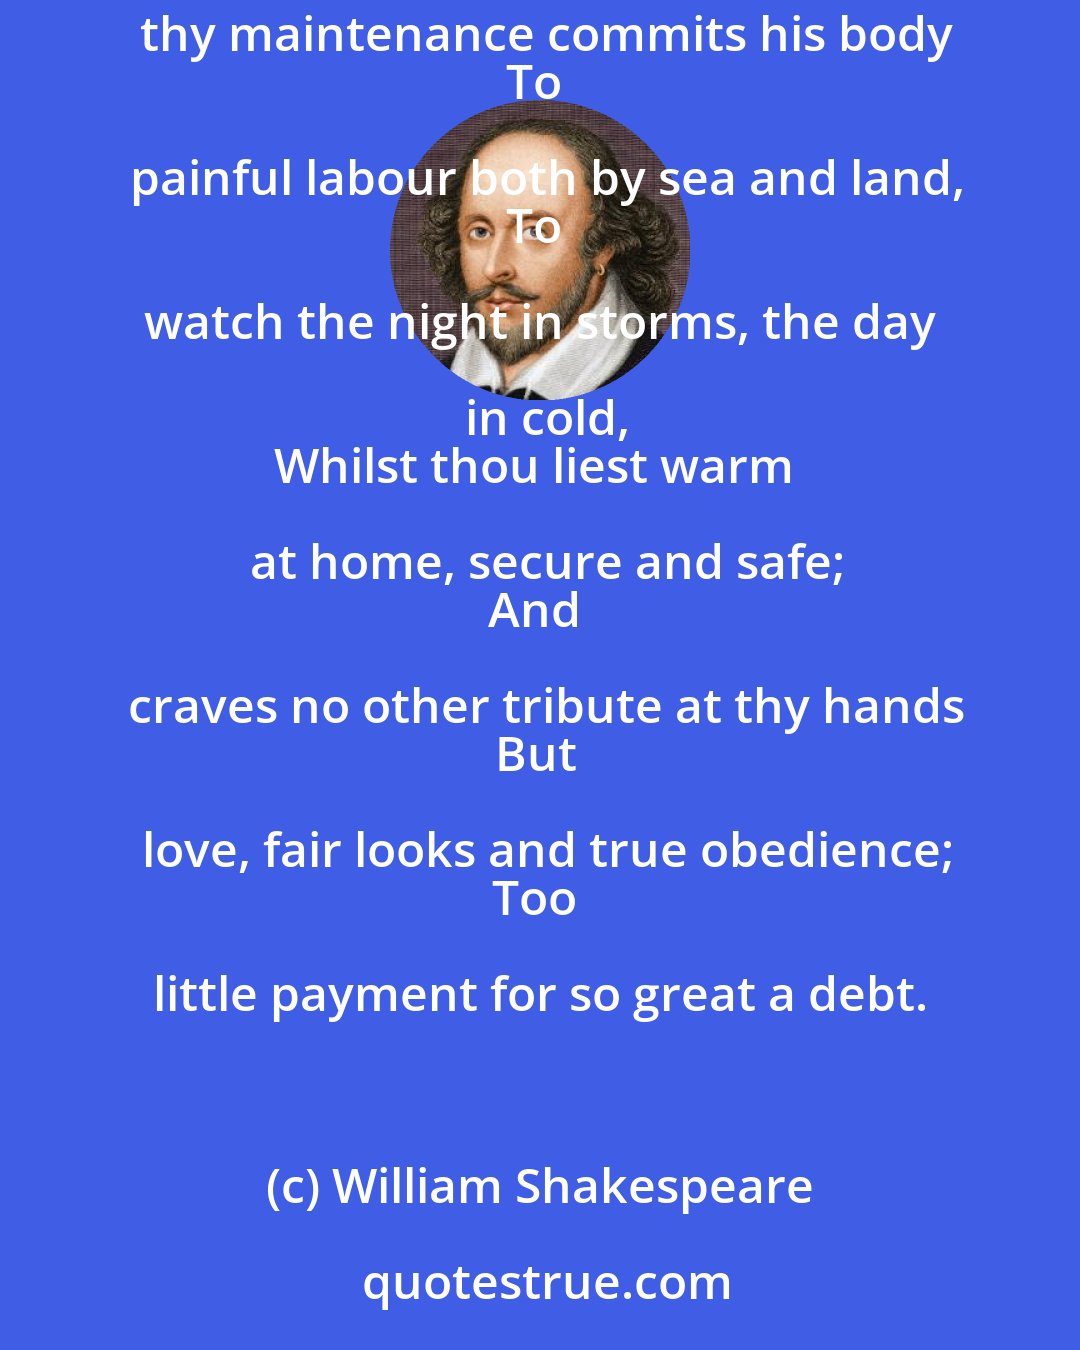 William Shakespeare: Thy husband is thy lord, thy life, thy keeper,
Thy head, thy sovereign; one that cares for thee,
And for thy maintenance commits his body
To painful labour both by sea and land,
To watch the night in storms, the day in cold,
Whilst thou liest warm at home, secure and safe;
And craves no other tribute at thy hands
But love, fair looks and true obedience;
Too little payment for so great a debt.